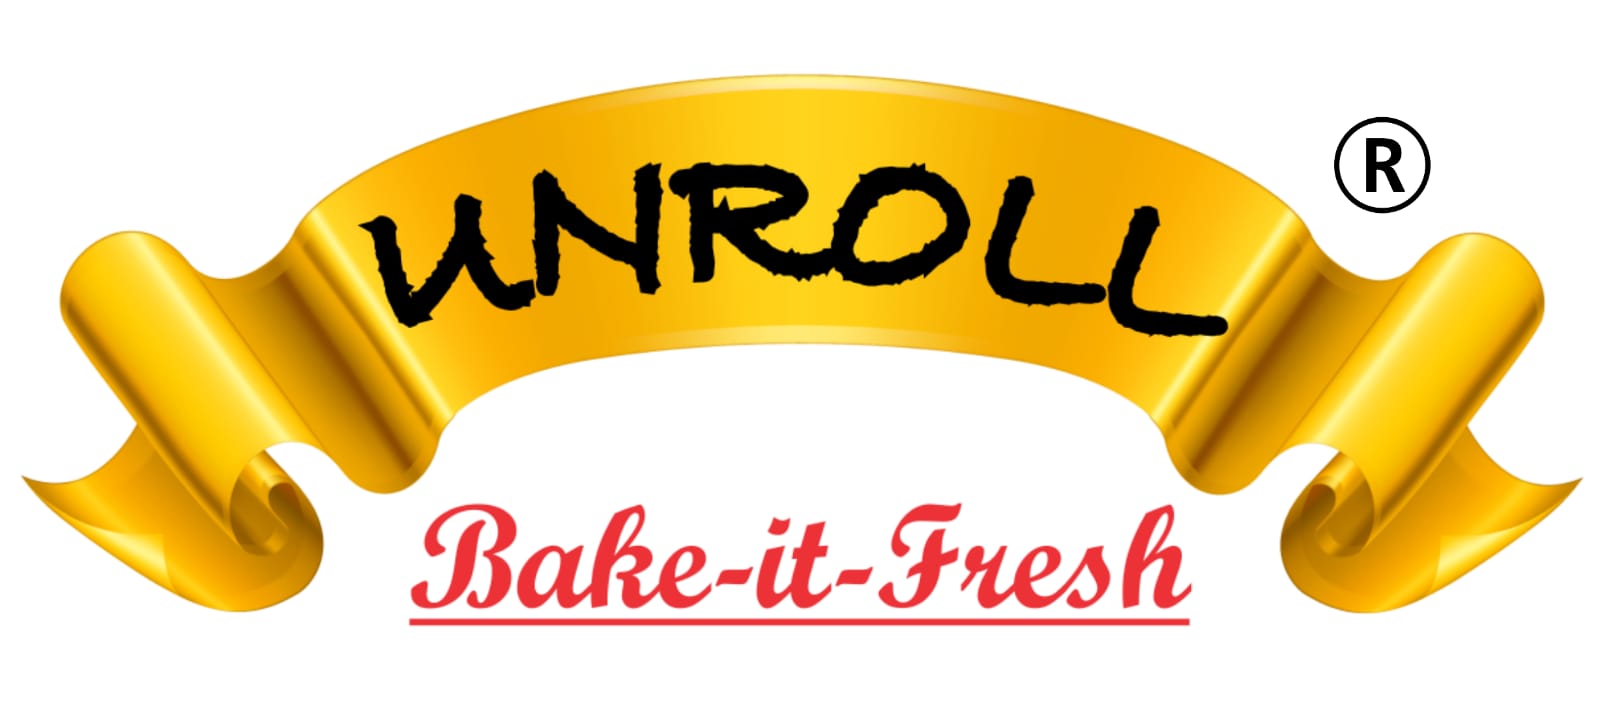 Unroll foods India private limited